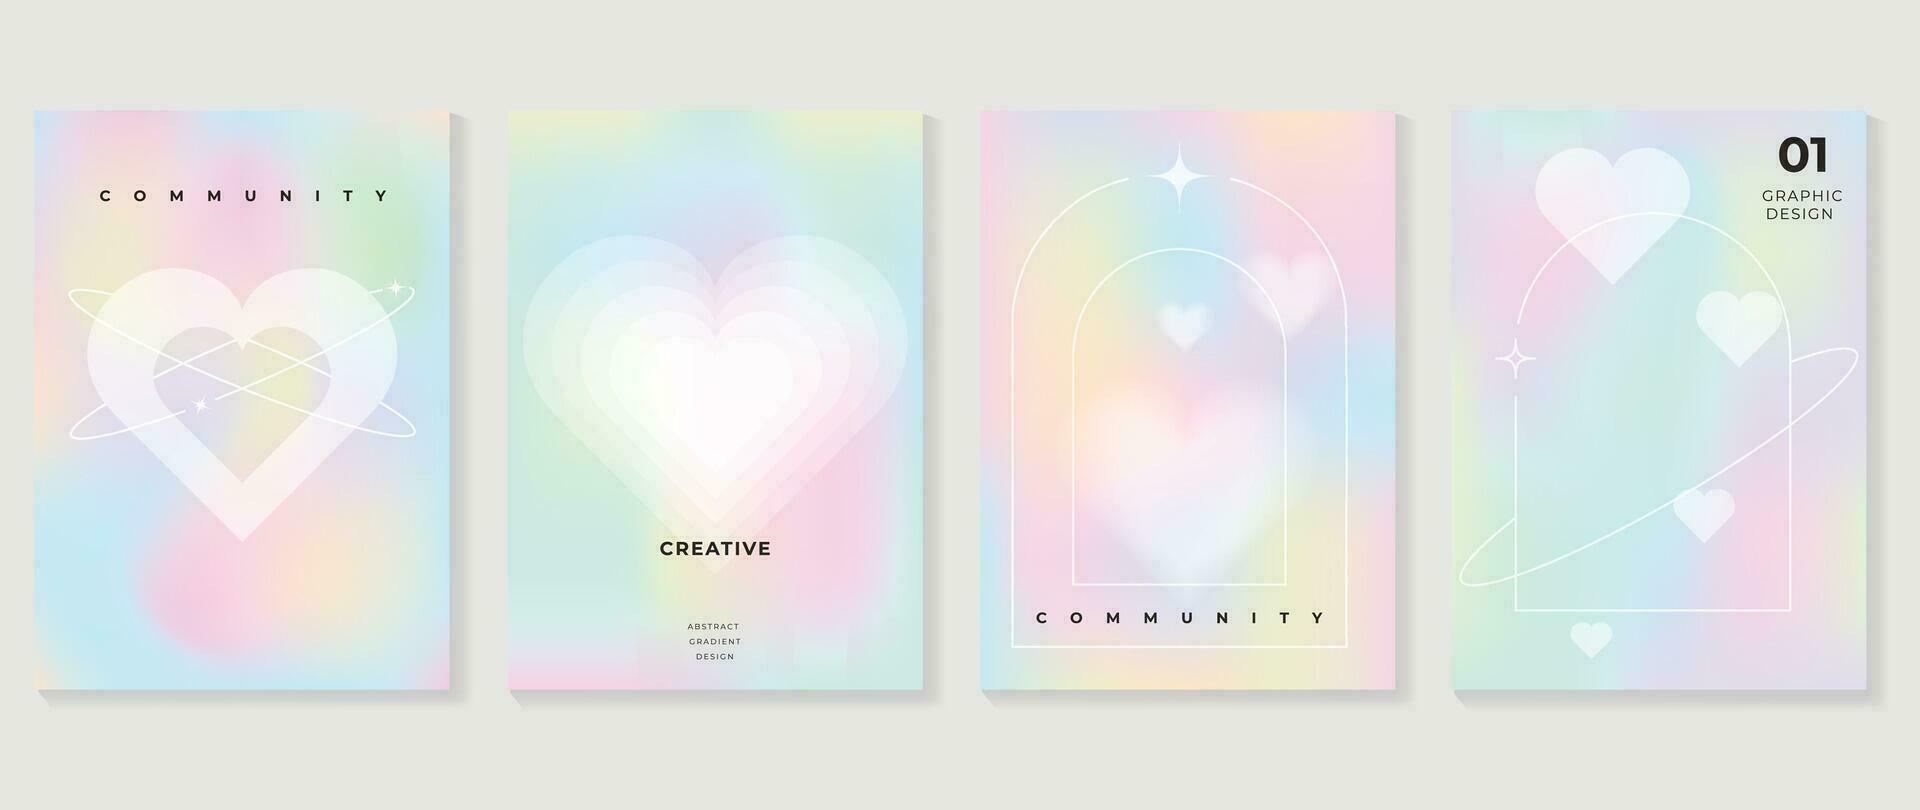 Idol lover posters set. Cute gradient holographic background vector with pastel color, heart, stars, sparkles, frame. Y2k trendy wallpaper design for social media, cards, banner, flyer, brochure.